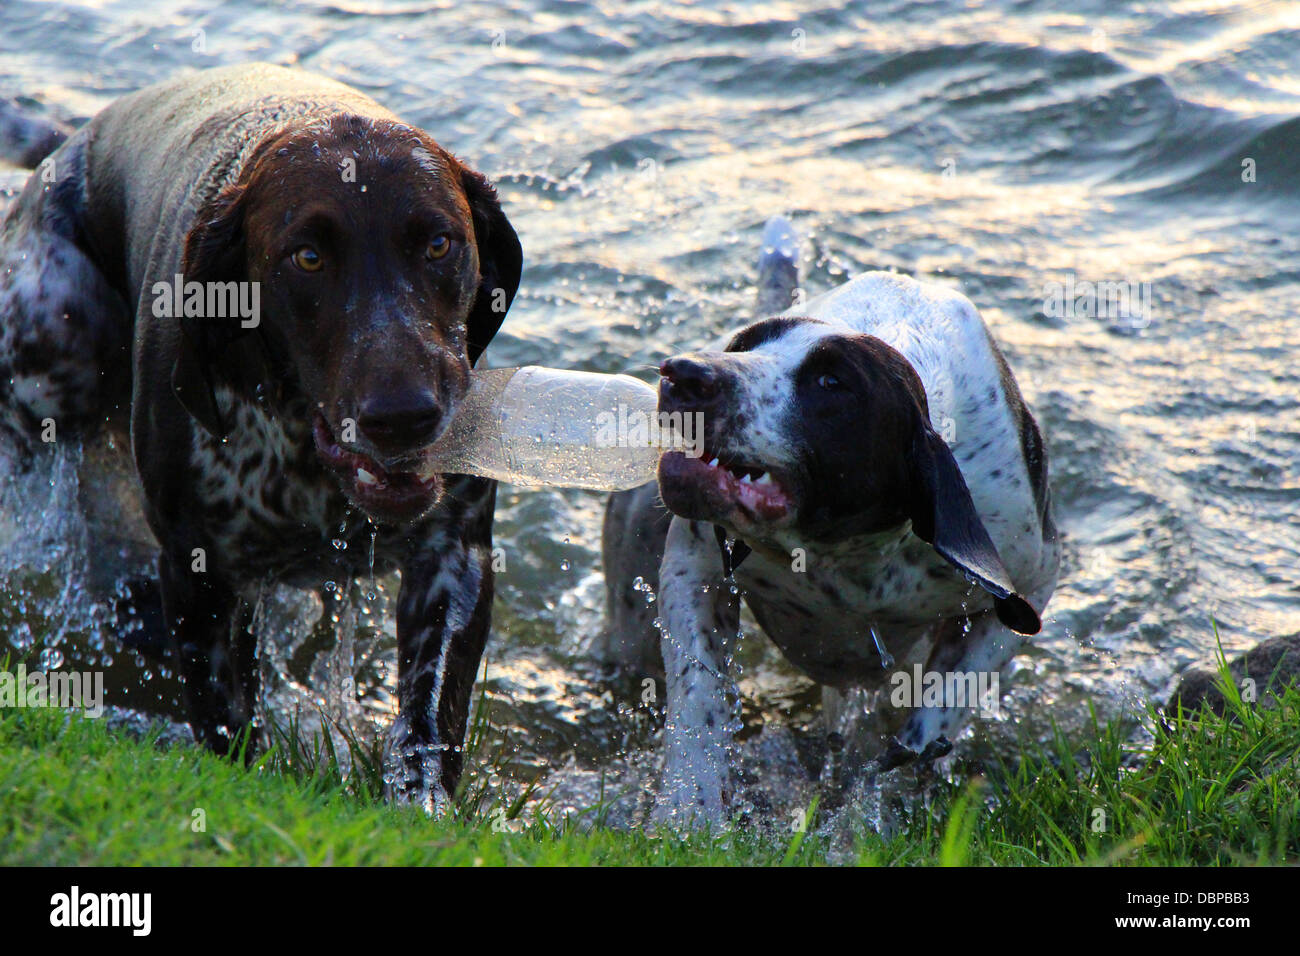 Two German short haired pointers playing with a plastic bottle and exiting water Stock Photo